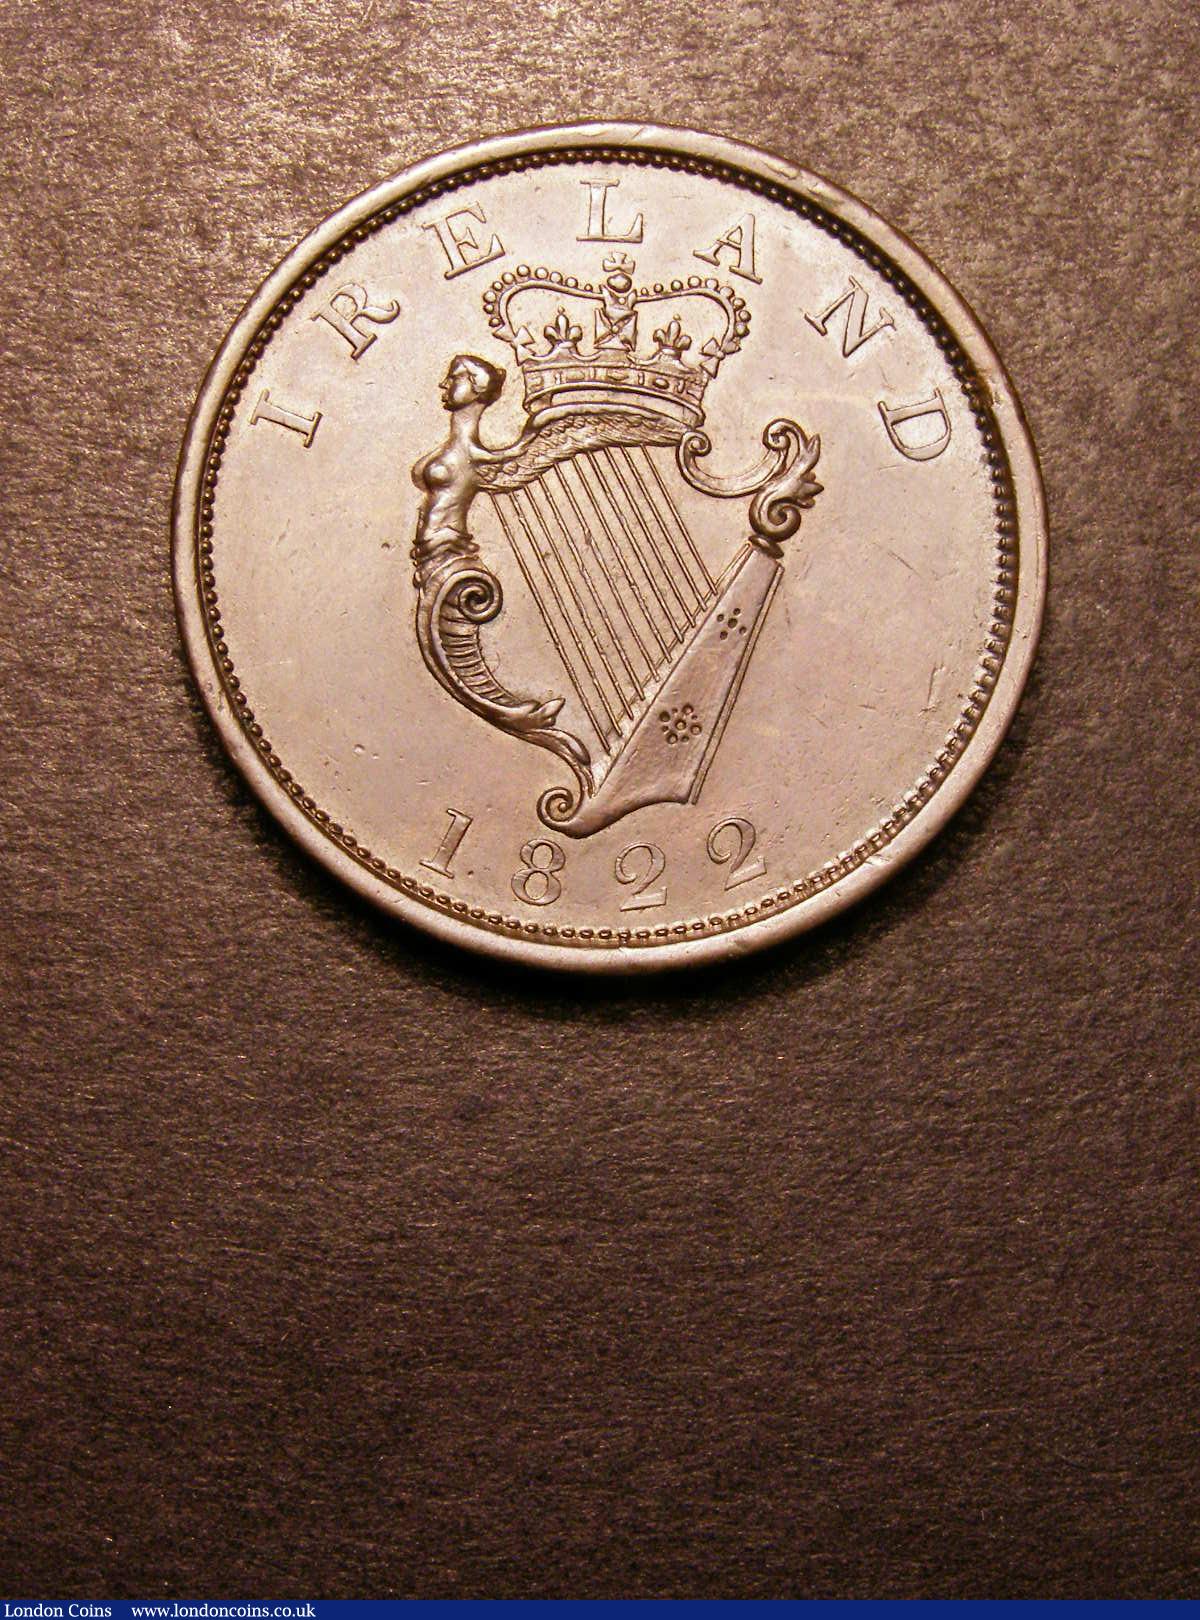 Ireland Penny Token 1822 Non Local Obverse Bust of Wellington right WELLINGTON ERIN GO BRAGH Reverse Crowned Harp with 10 Strings, Withers 1972, EF and scarce in high grade : Tokens : Auction 133 : Lot 1137